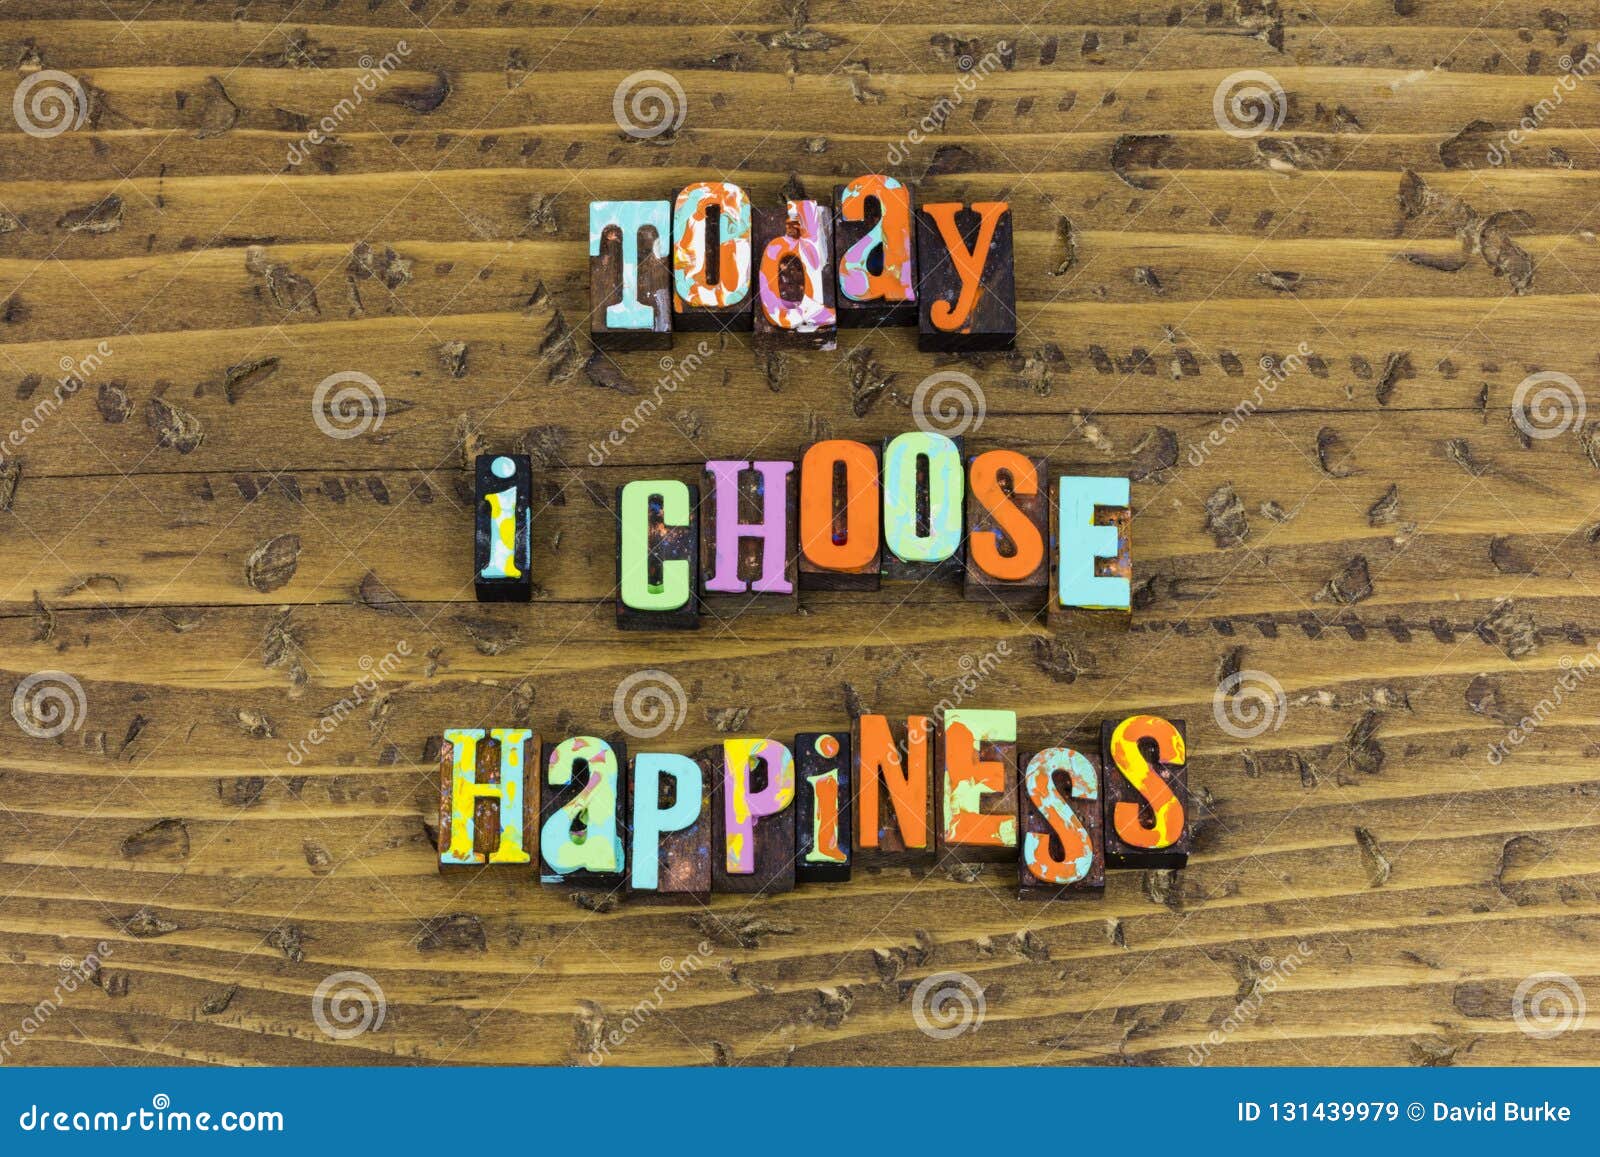 Choose Happy Wallpapers  Top Free Choose Happy Backgrounds   WallpaperAccess